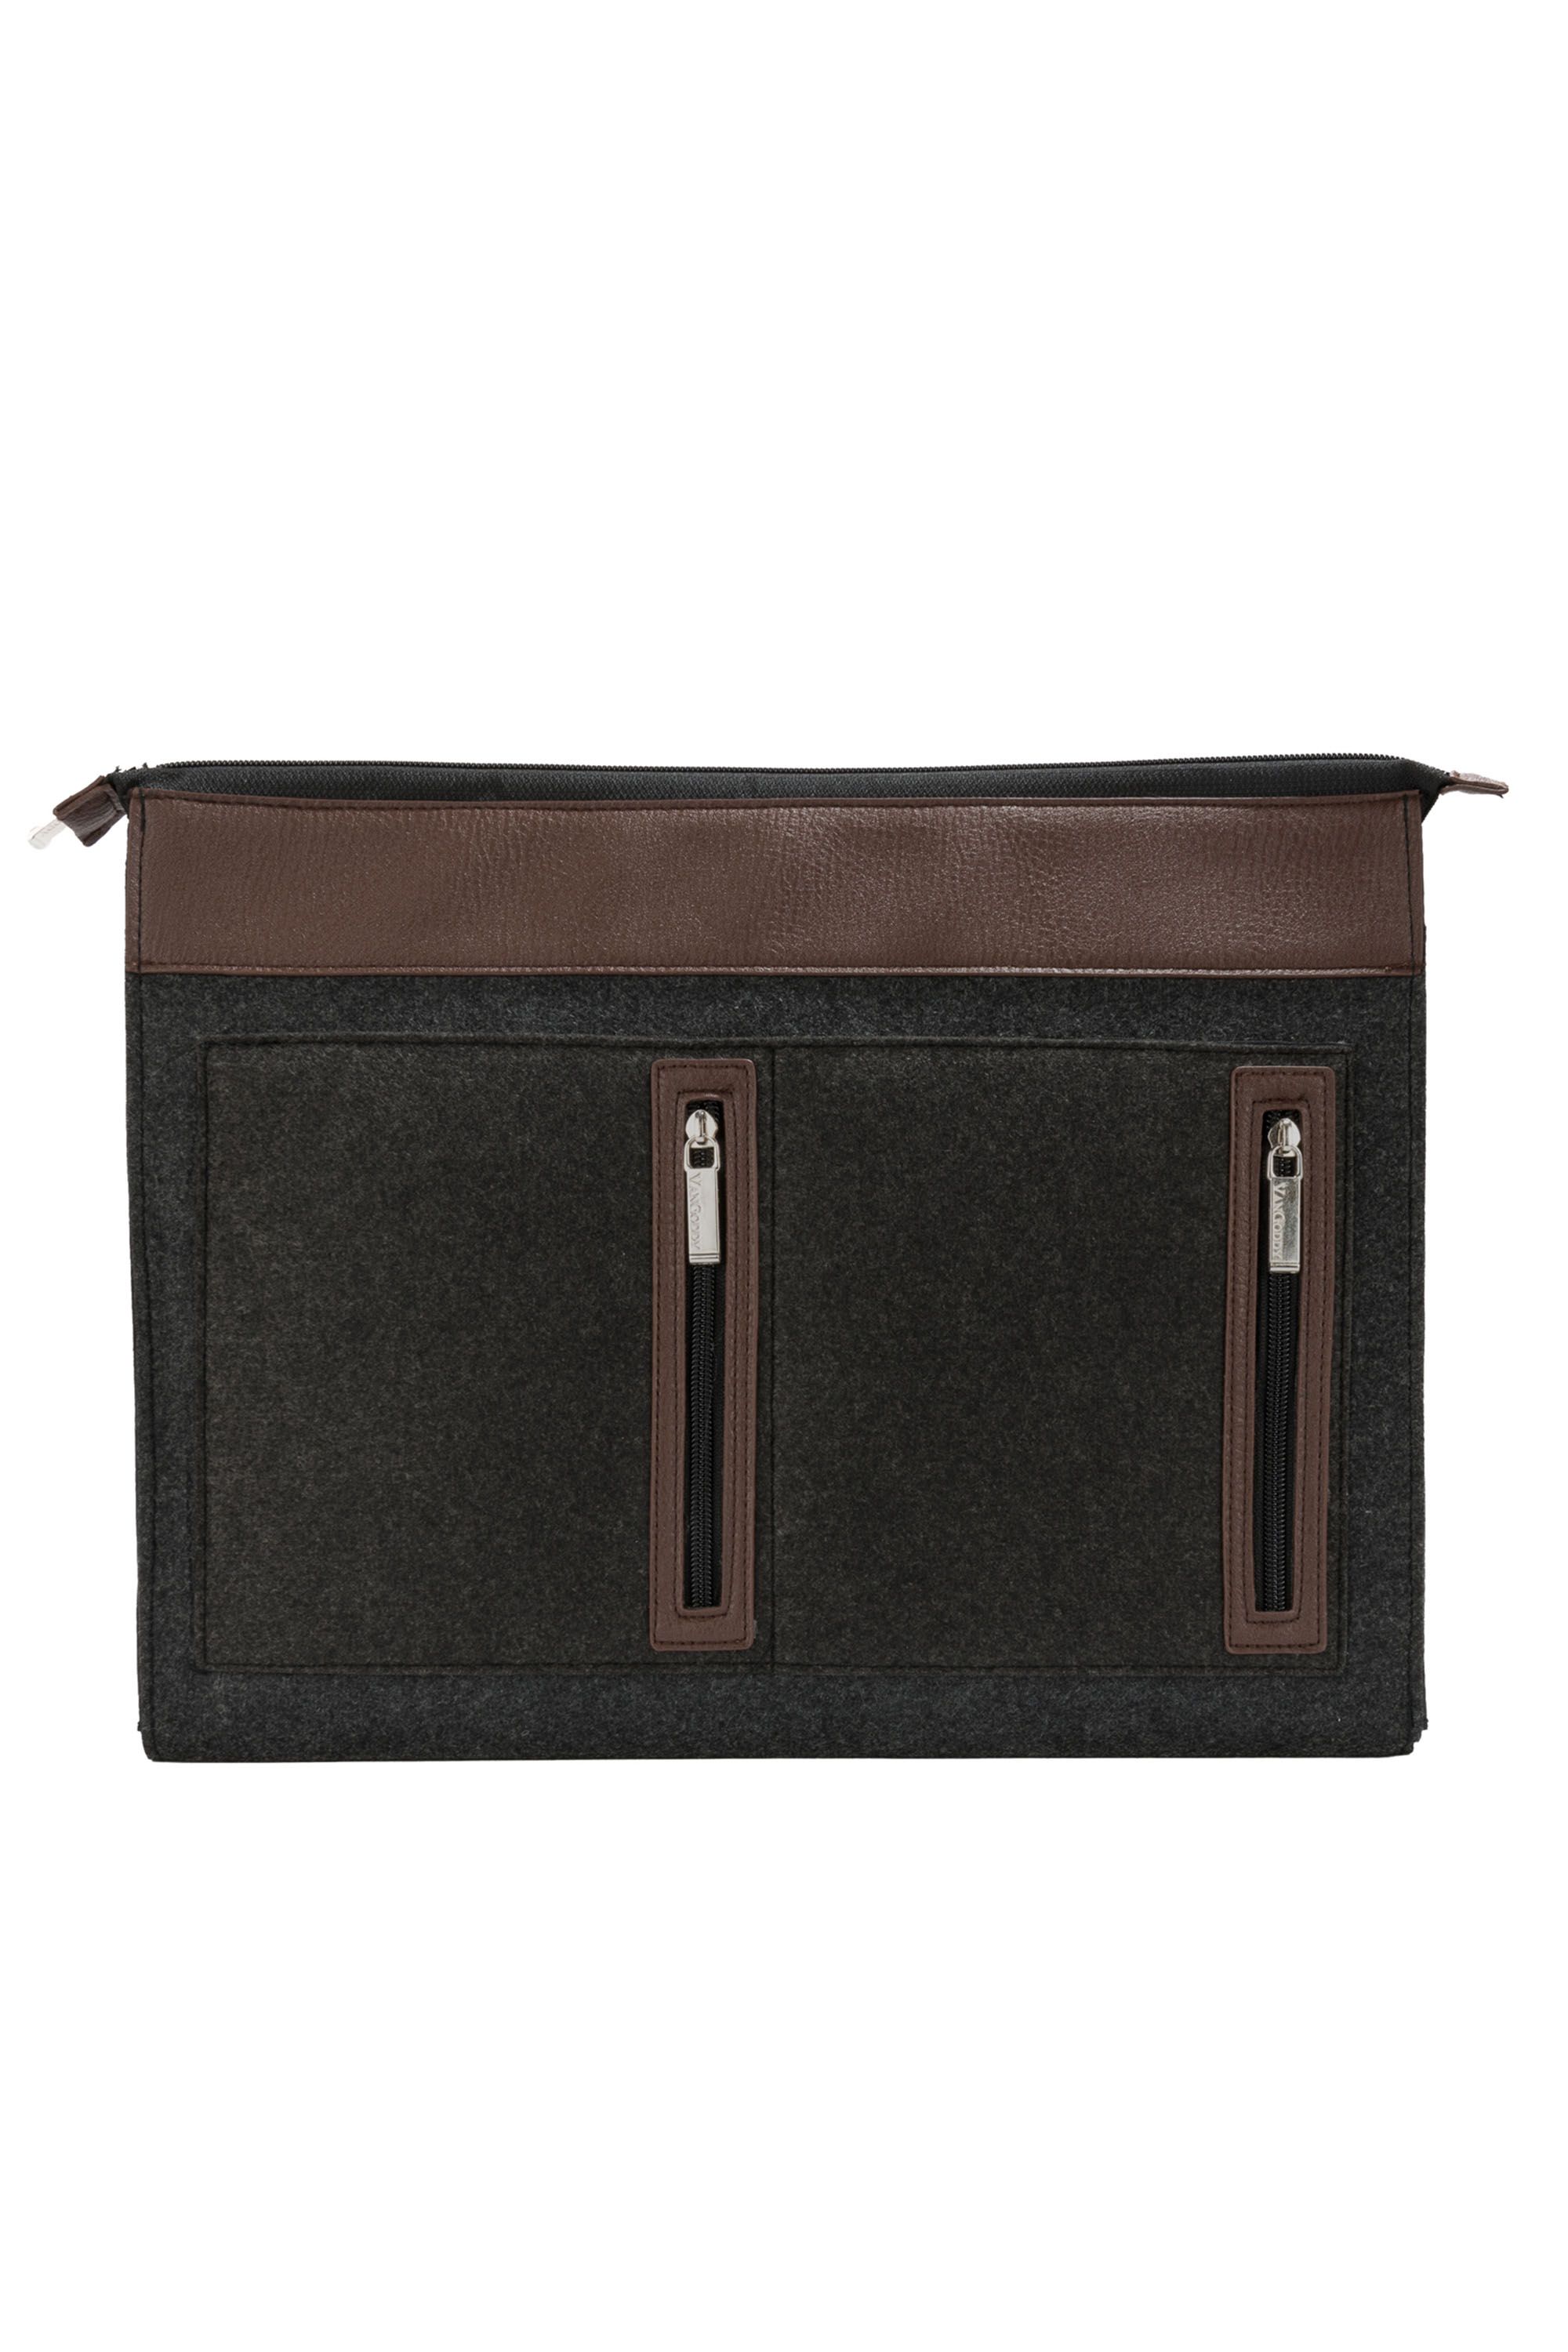 Leather Laptop Sleeve and Charger Case – Gifts for Designers